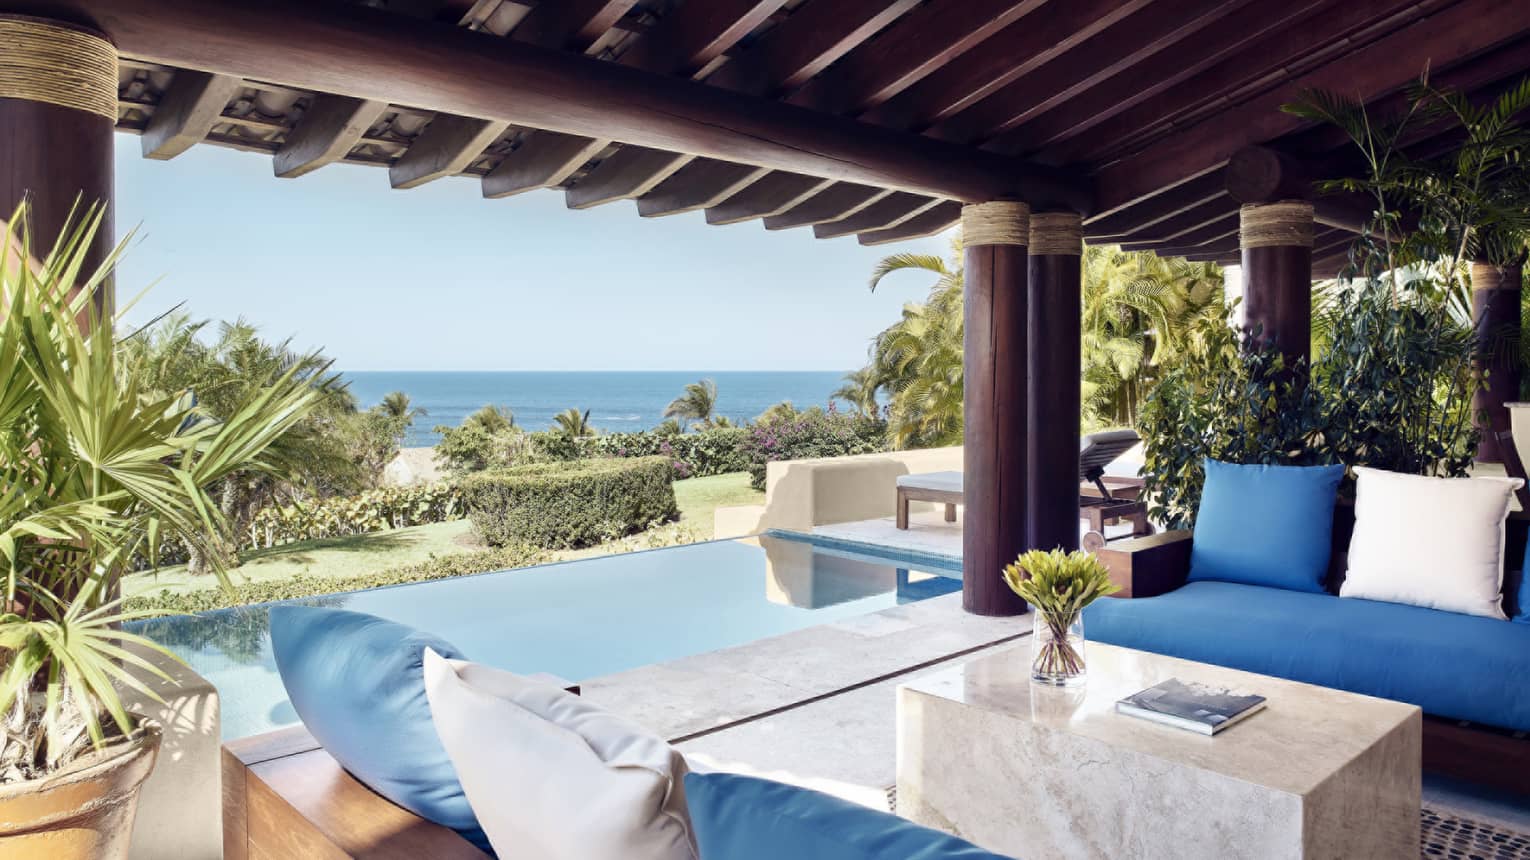 Covered outdoor lounge next to pool and ocean view